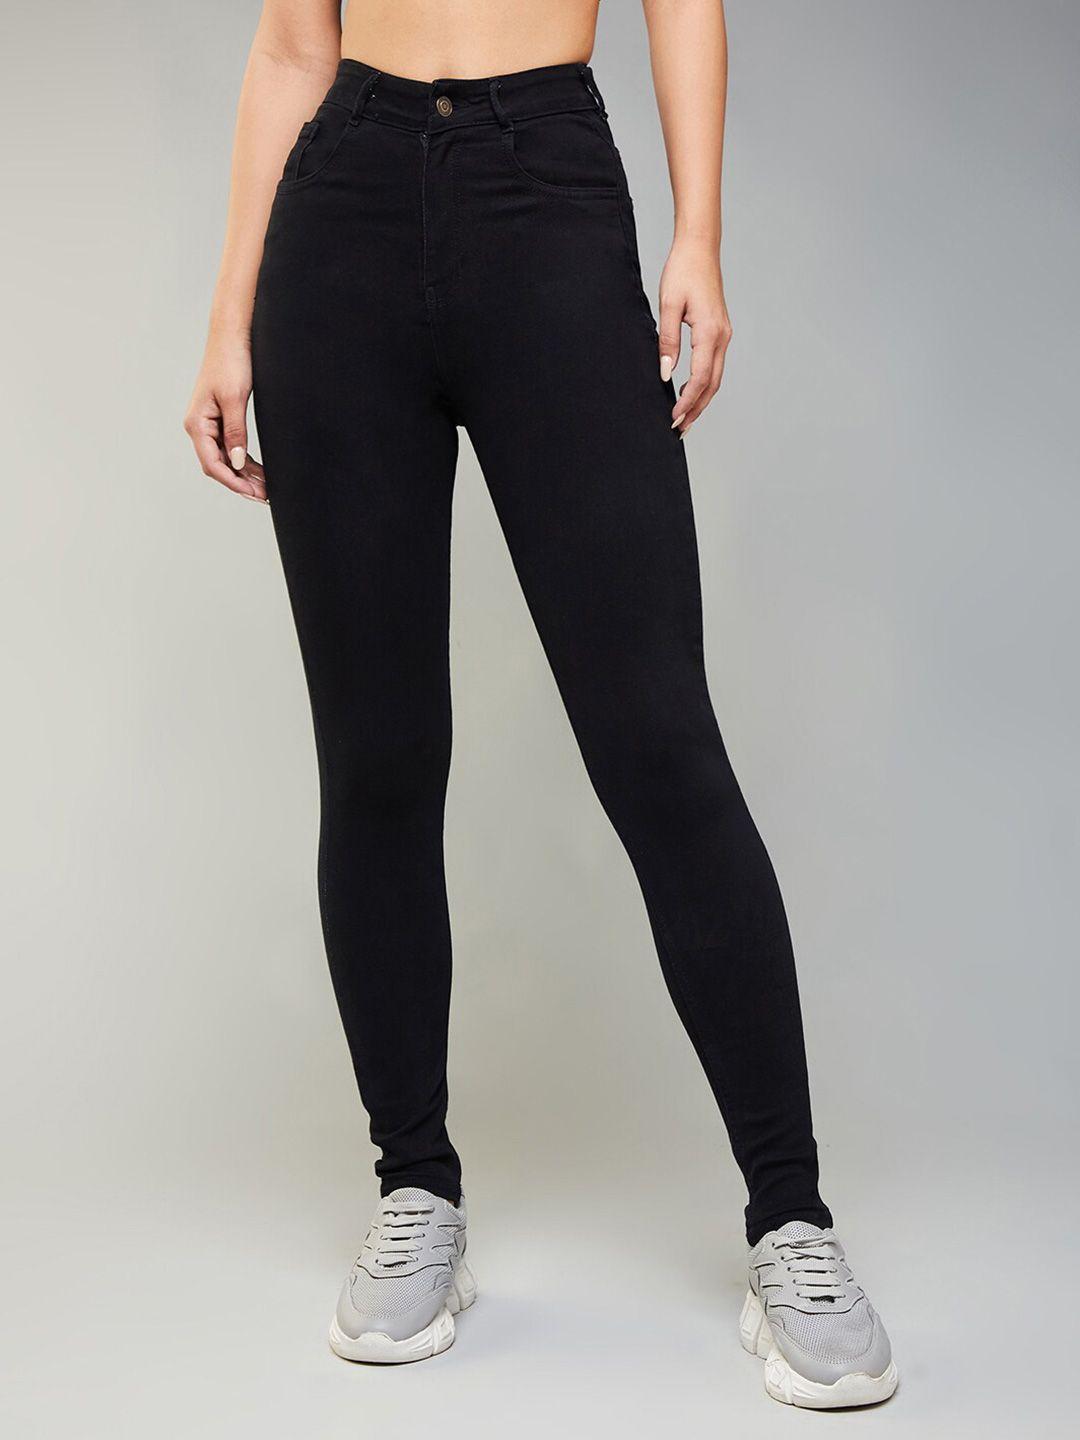 dolce crudo women black skinny fit high-rise stretchable jeans